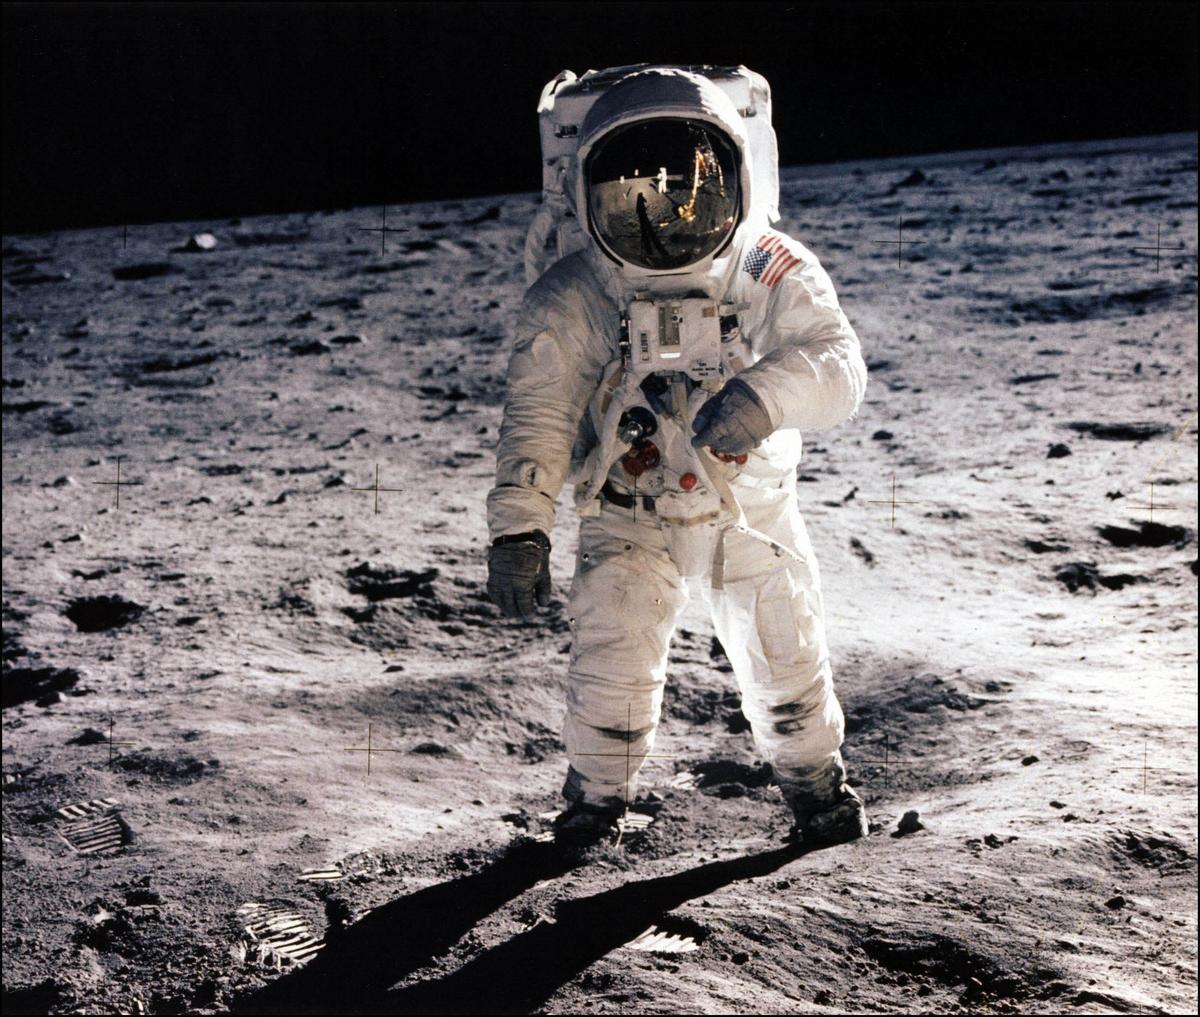 This picture taken 21 July 1969 shows astronaut Edwin E. Aldrin Jr. walking on the surface of the Moon near the leg of the Lunar Module "Eagle." (NASA/AFP via Getty Images)